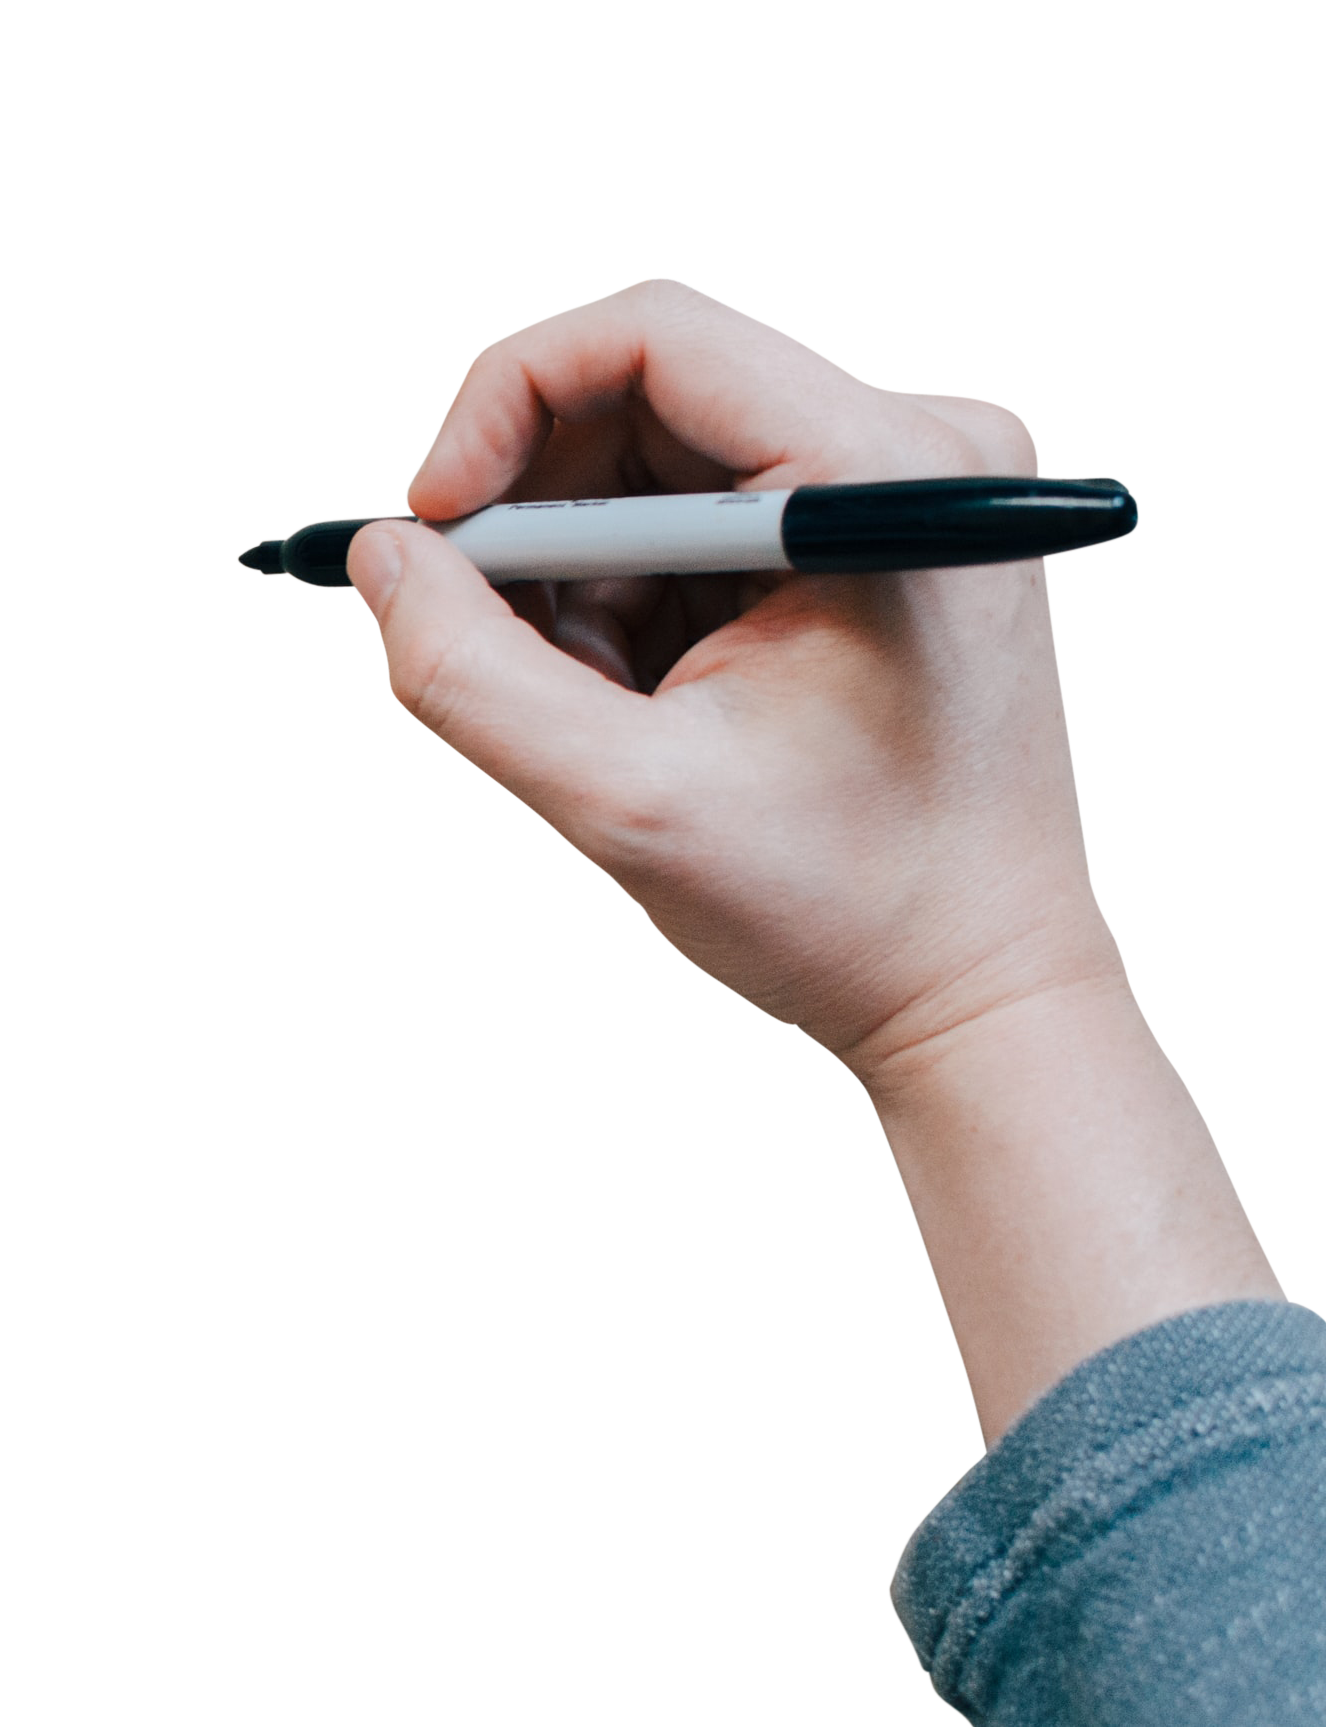 hand and pen PNG image, transparent hand and pen png, hand and pen png hd images download